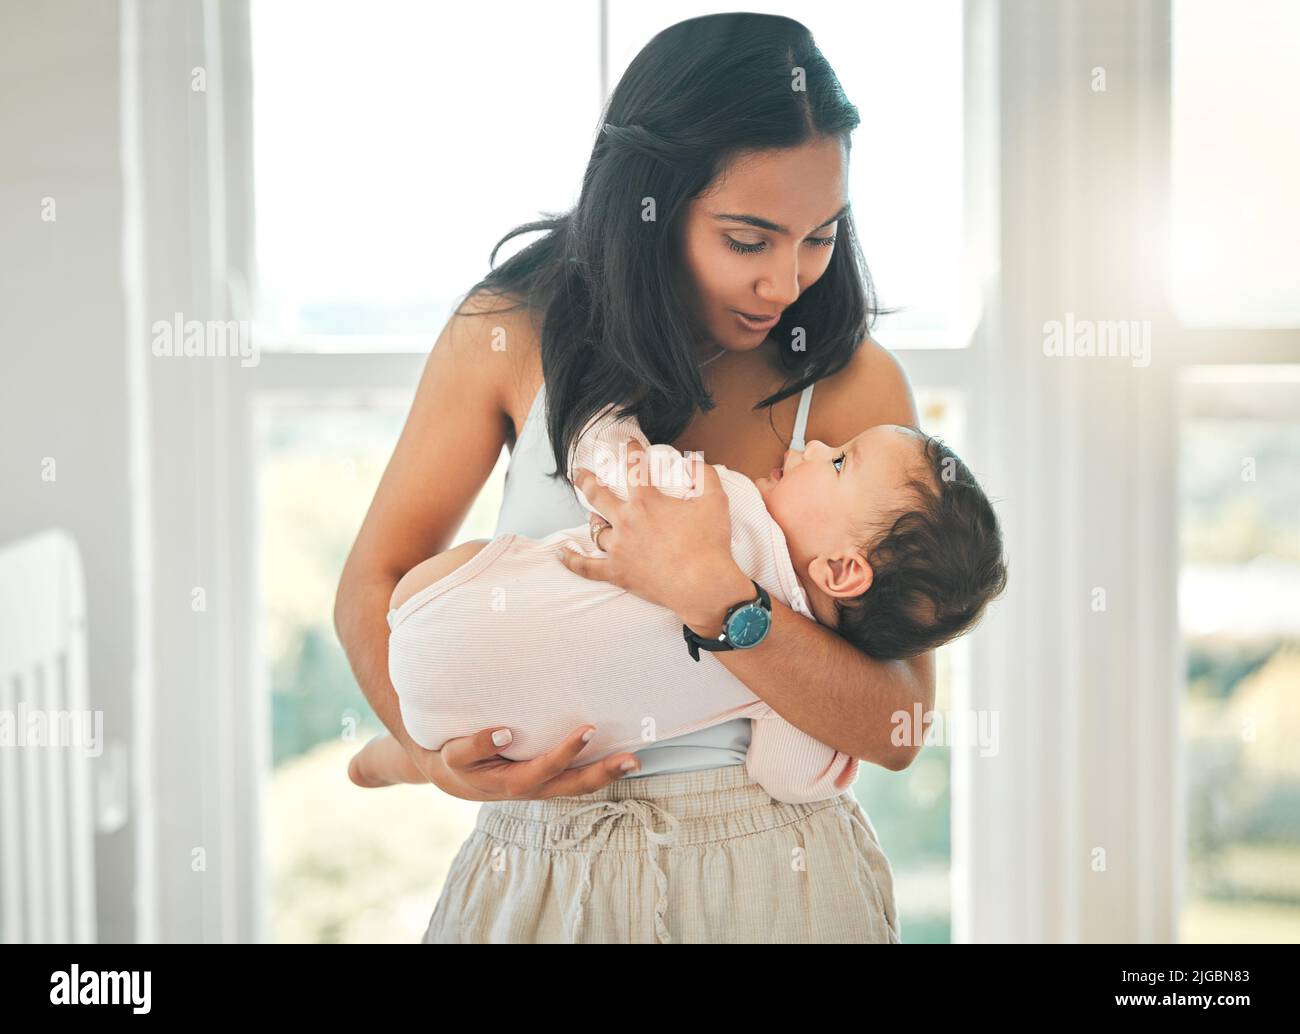 Her whole world. an attractive young woman and her newborn baby at home. Stock Photo